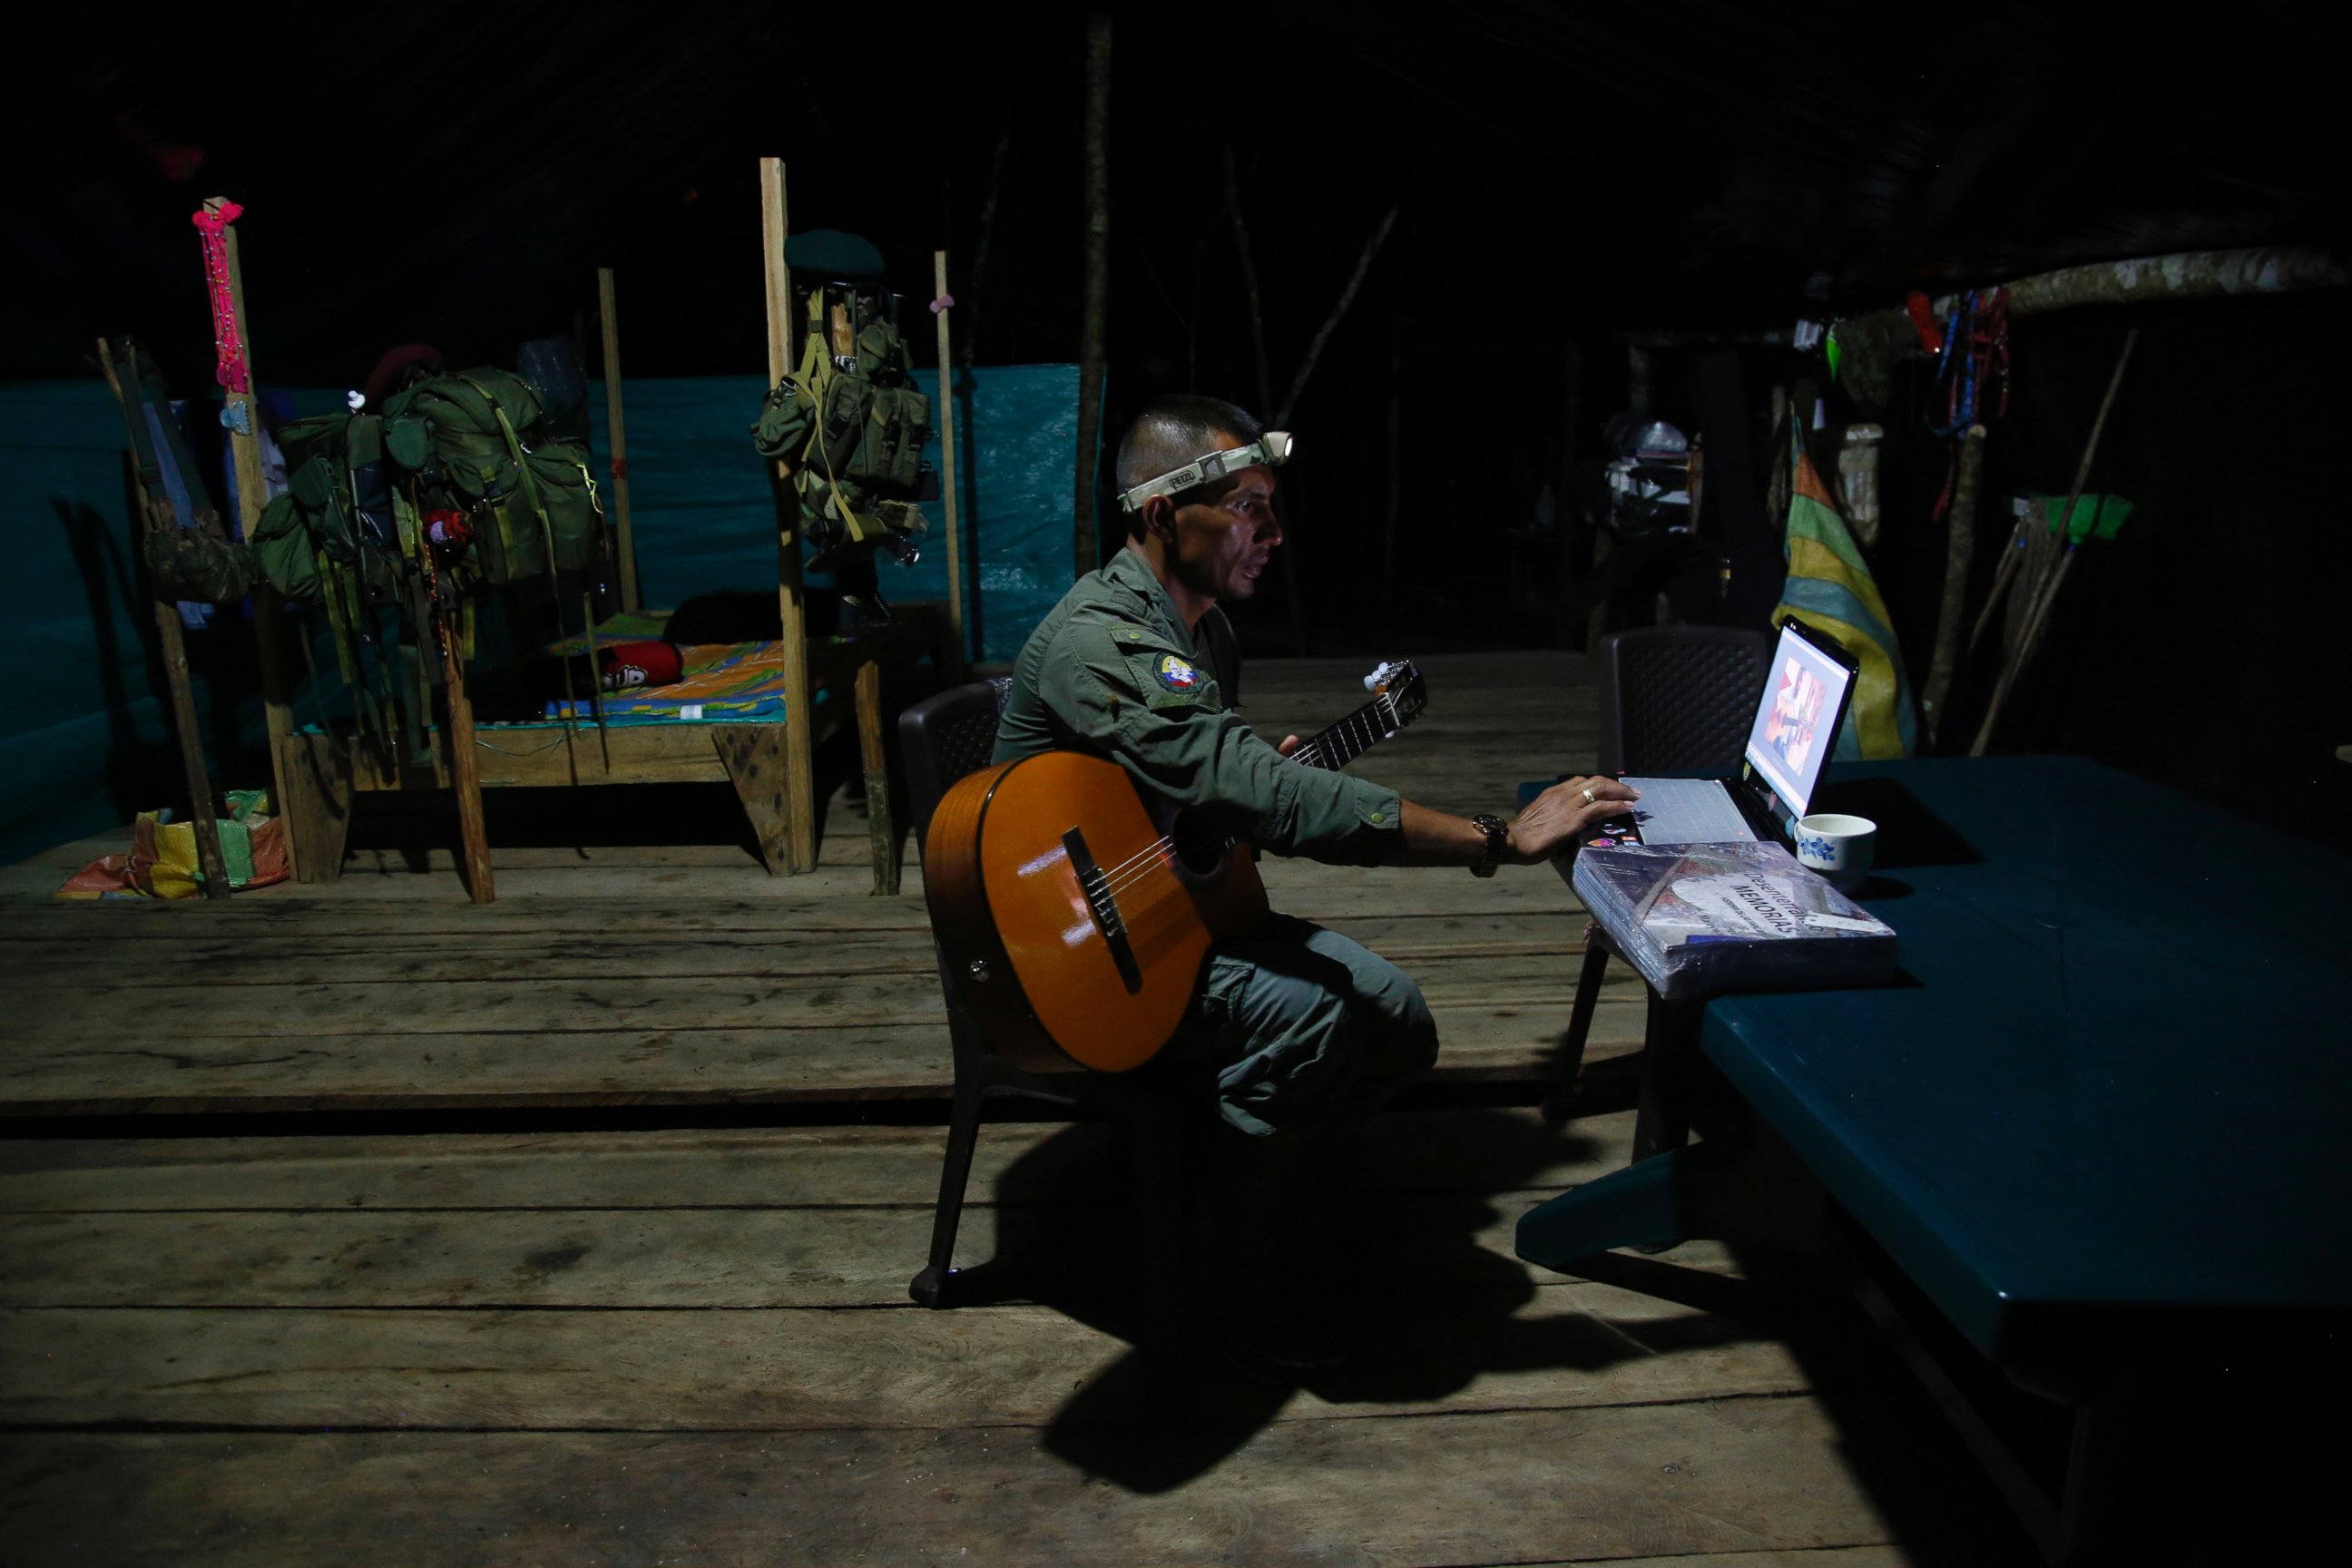 PHOTO: Manuel, a mid-level commander for the 48th Front of the Revolutionary Armed Forces of Colombia, or FARC, learns to play his guitar via the internet at a FARC encampment in the southern jungles of Putumayo, Colombia, Aug. 11, 2016.